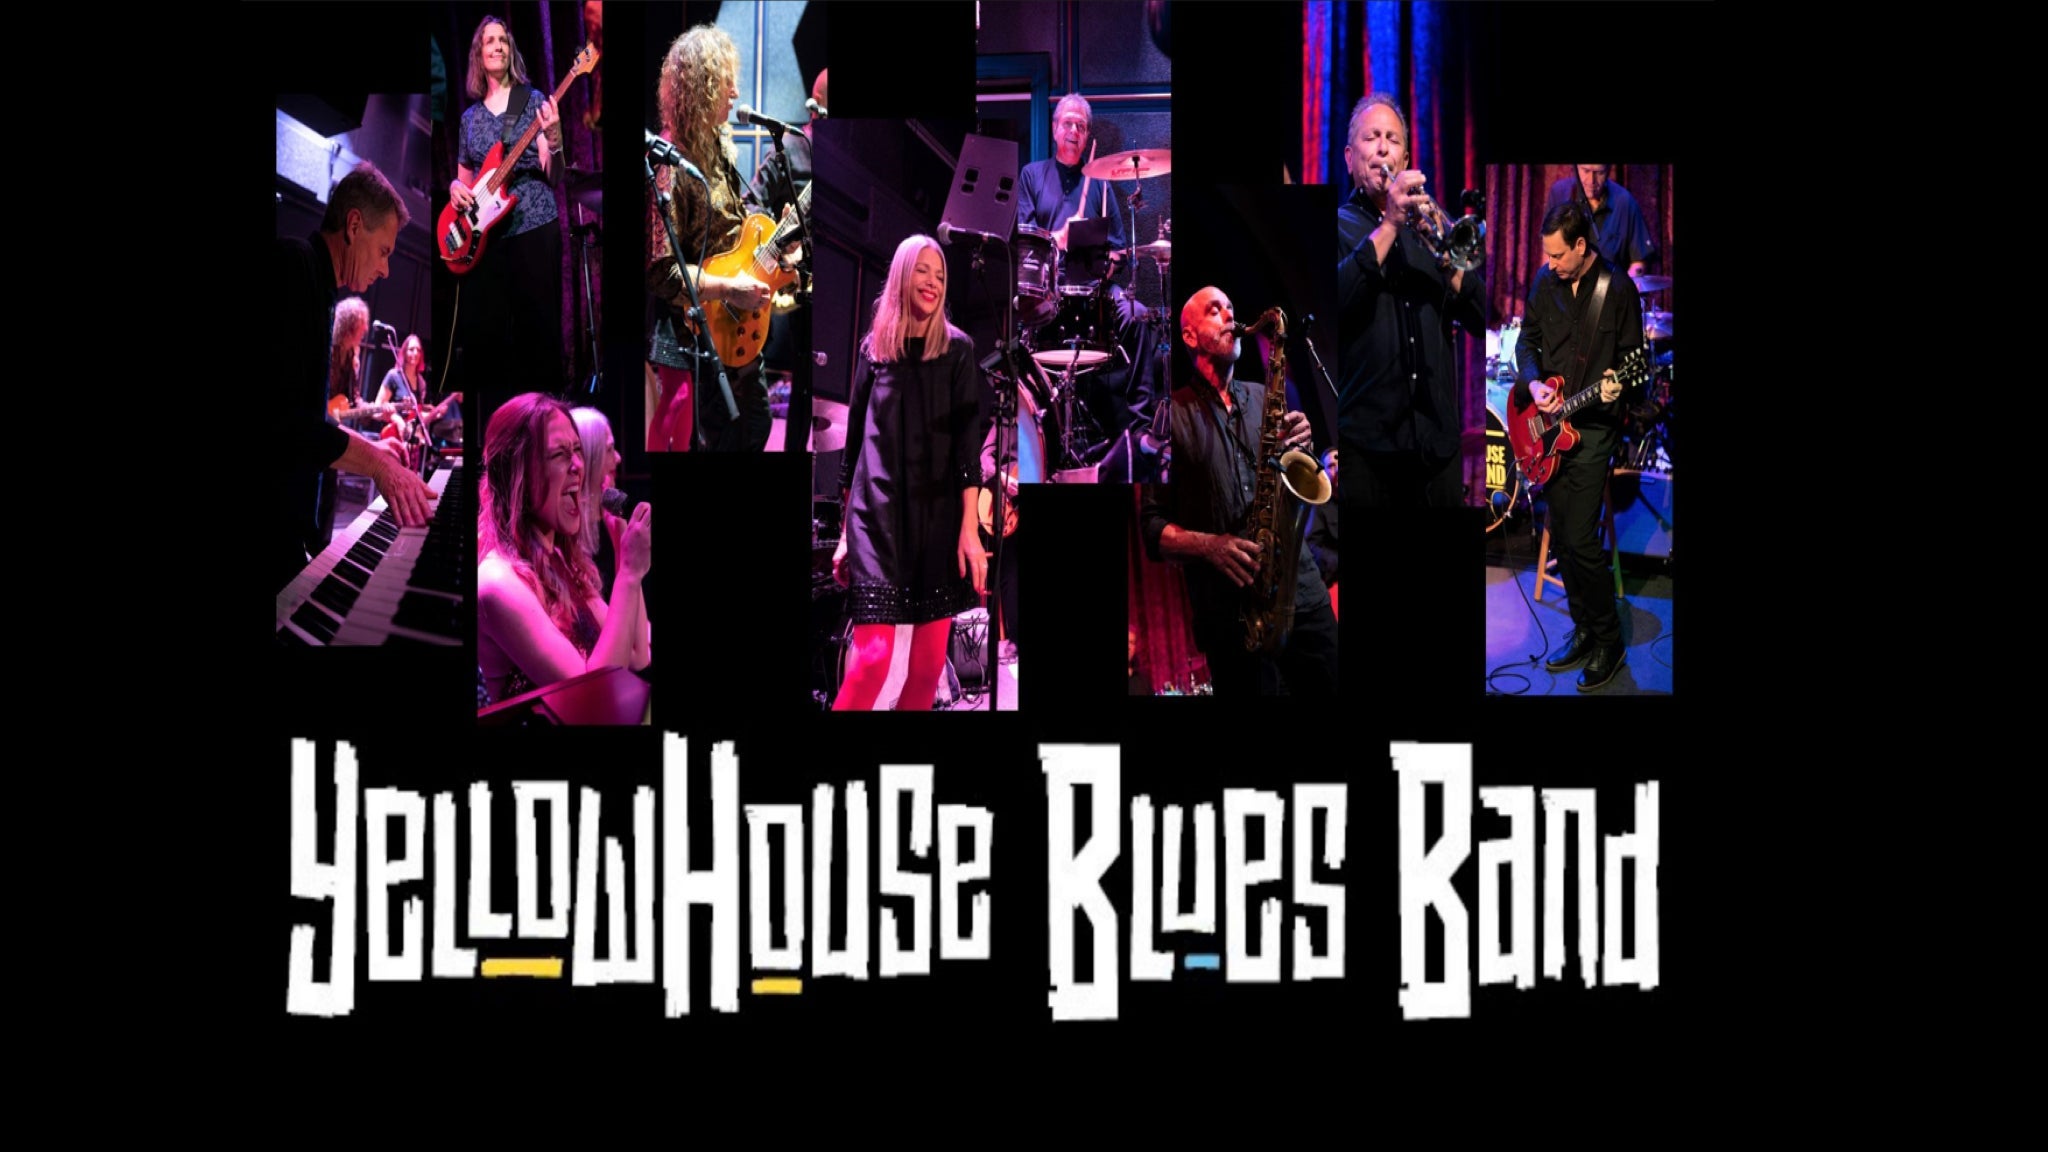 The YellowHouse Blues Band